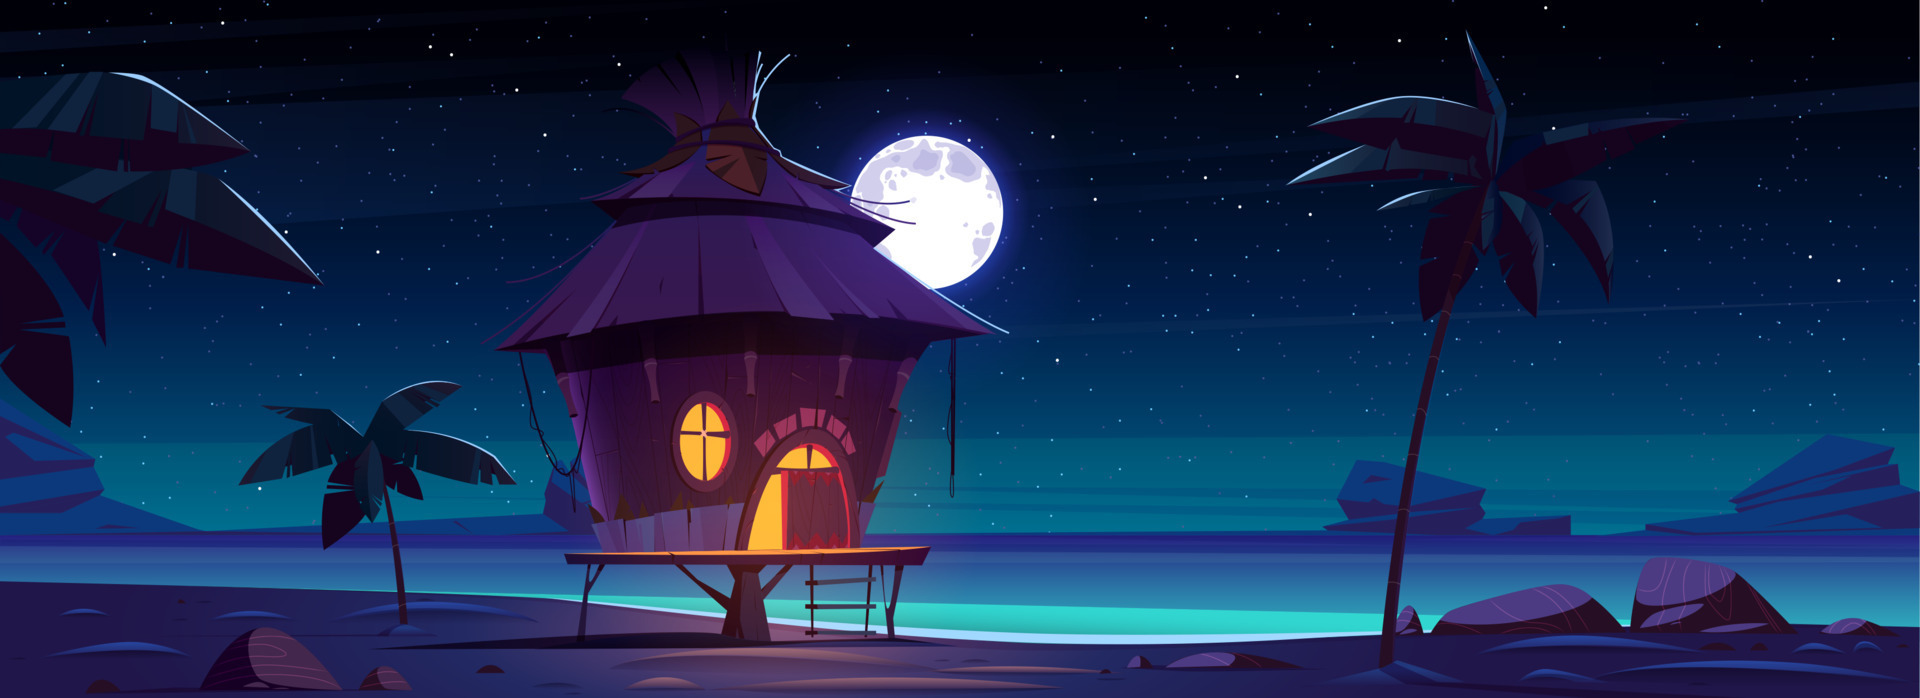 Beach hut or bungalow at night on tropical island 15008351 Vector Art ...